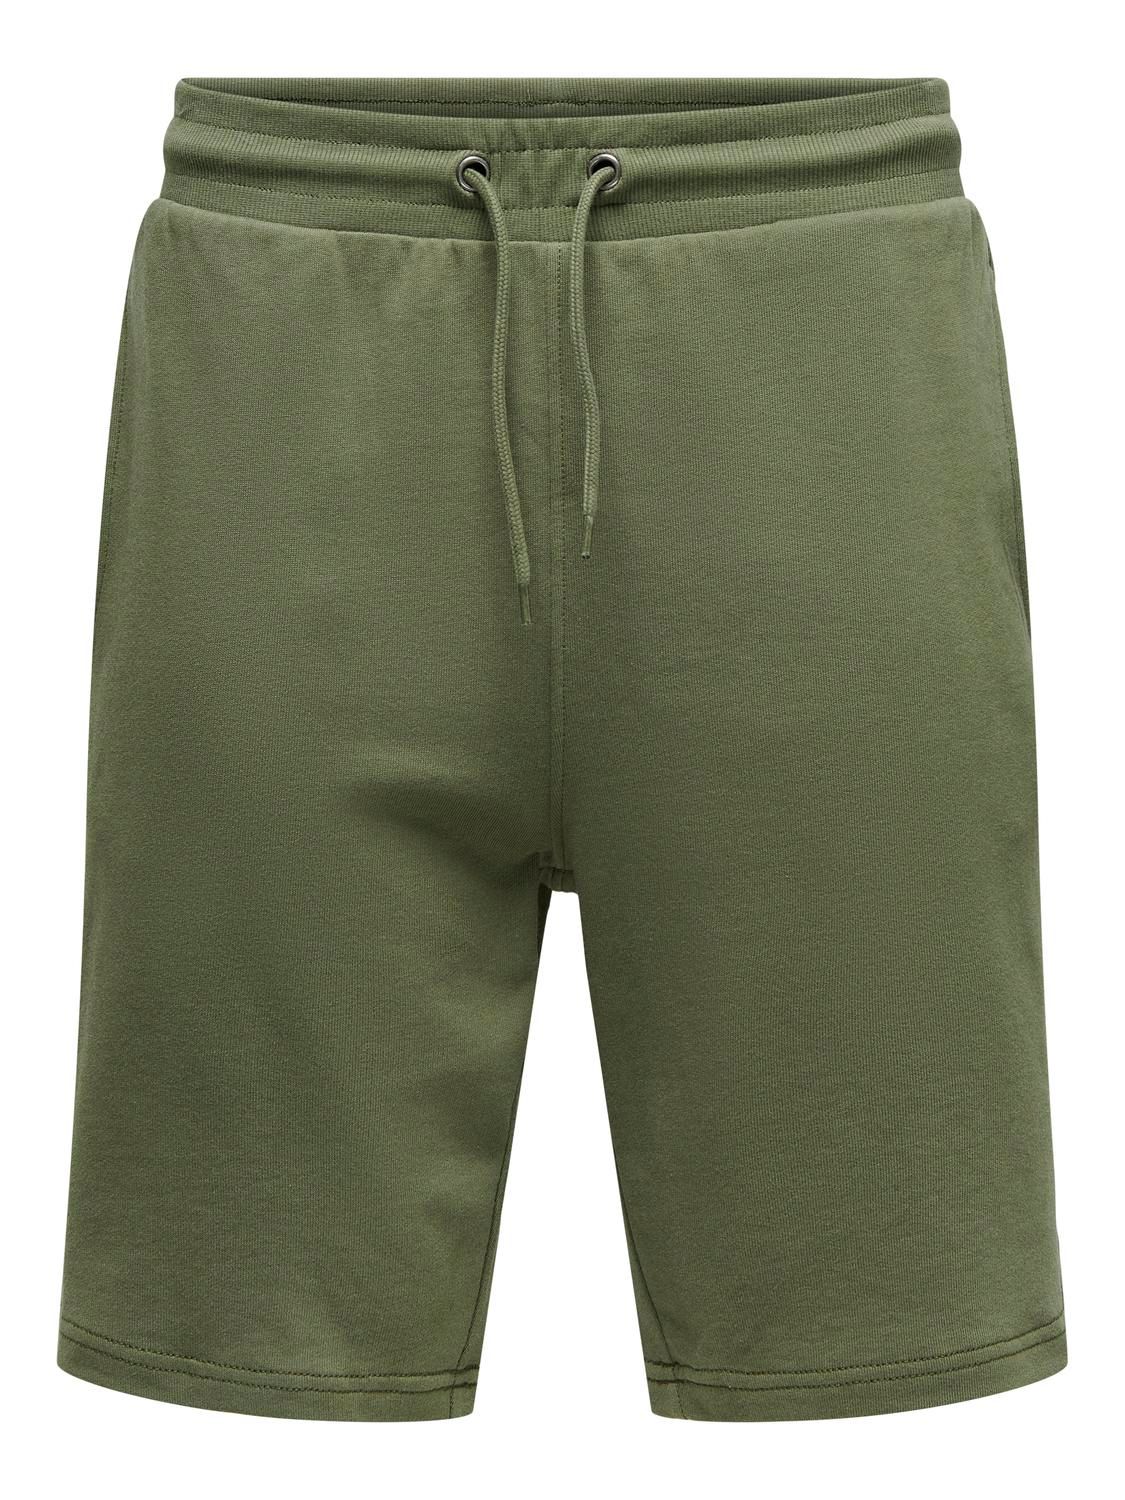 Only & Sons ONSNEIL SWEAT SHORTS Olive Night 2900147660045